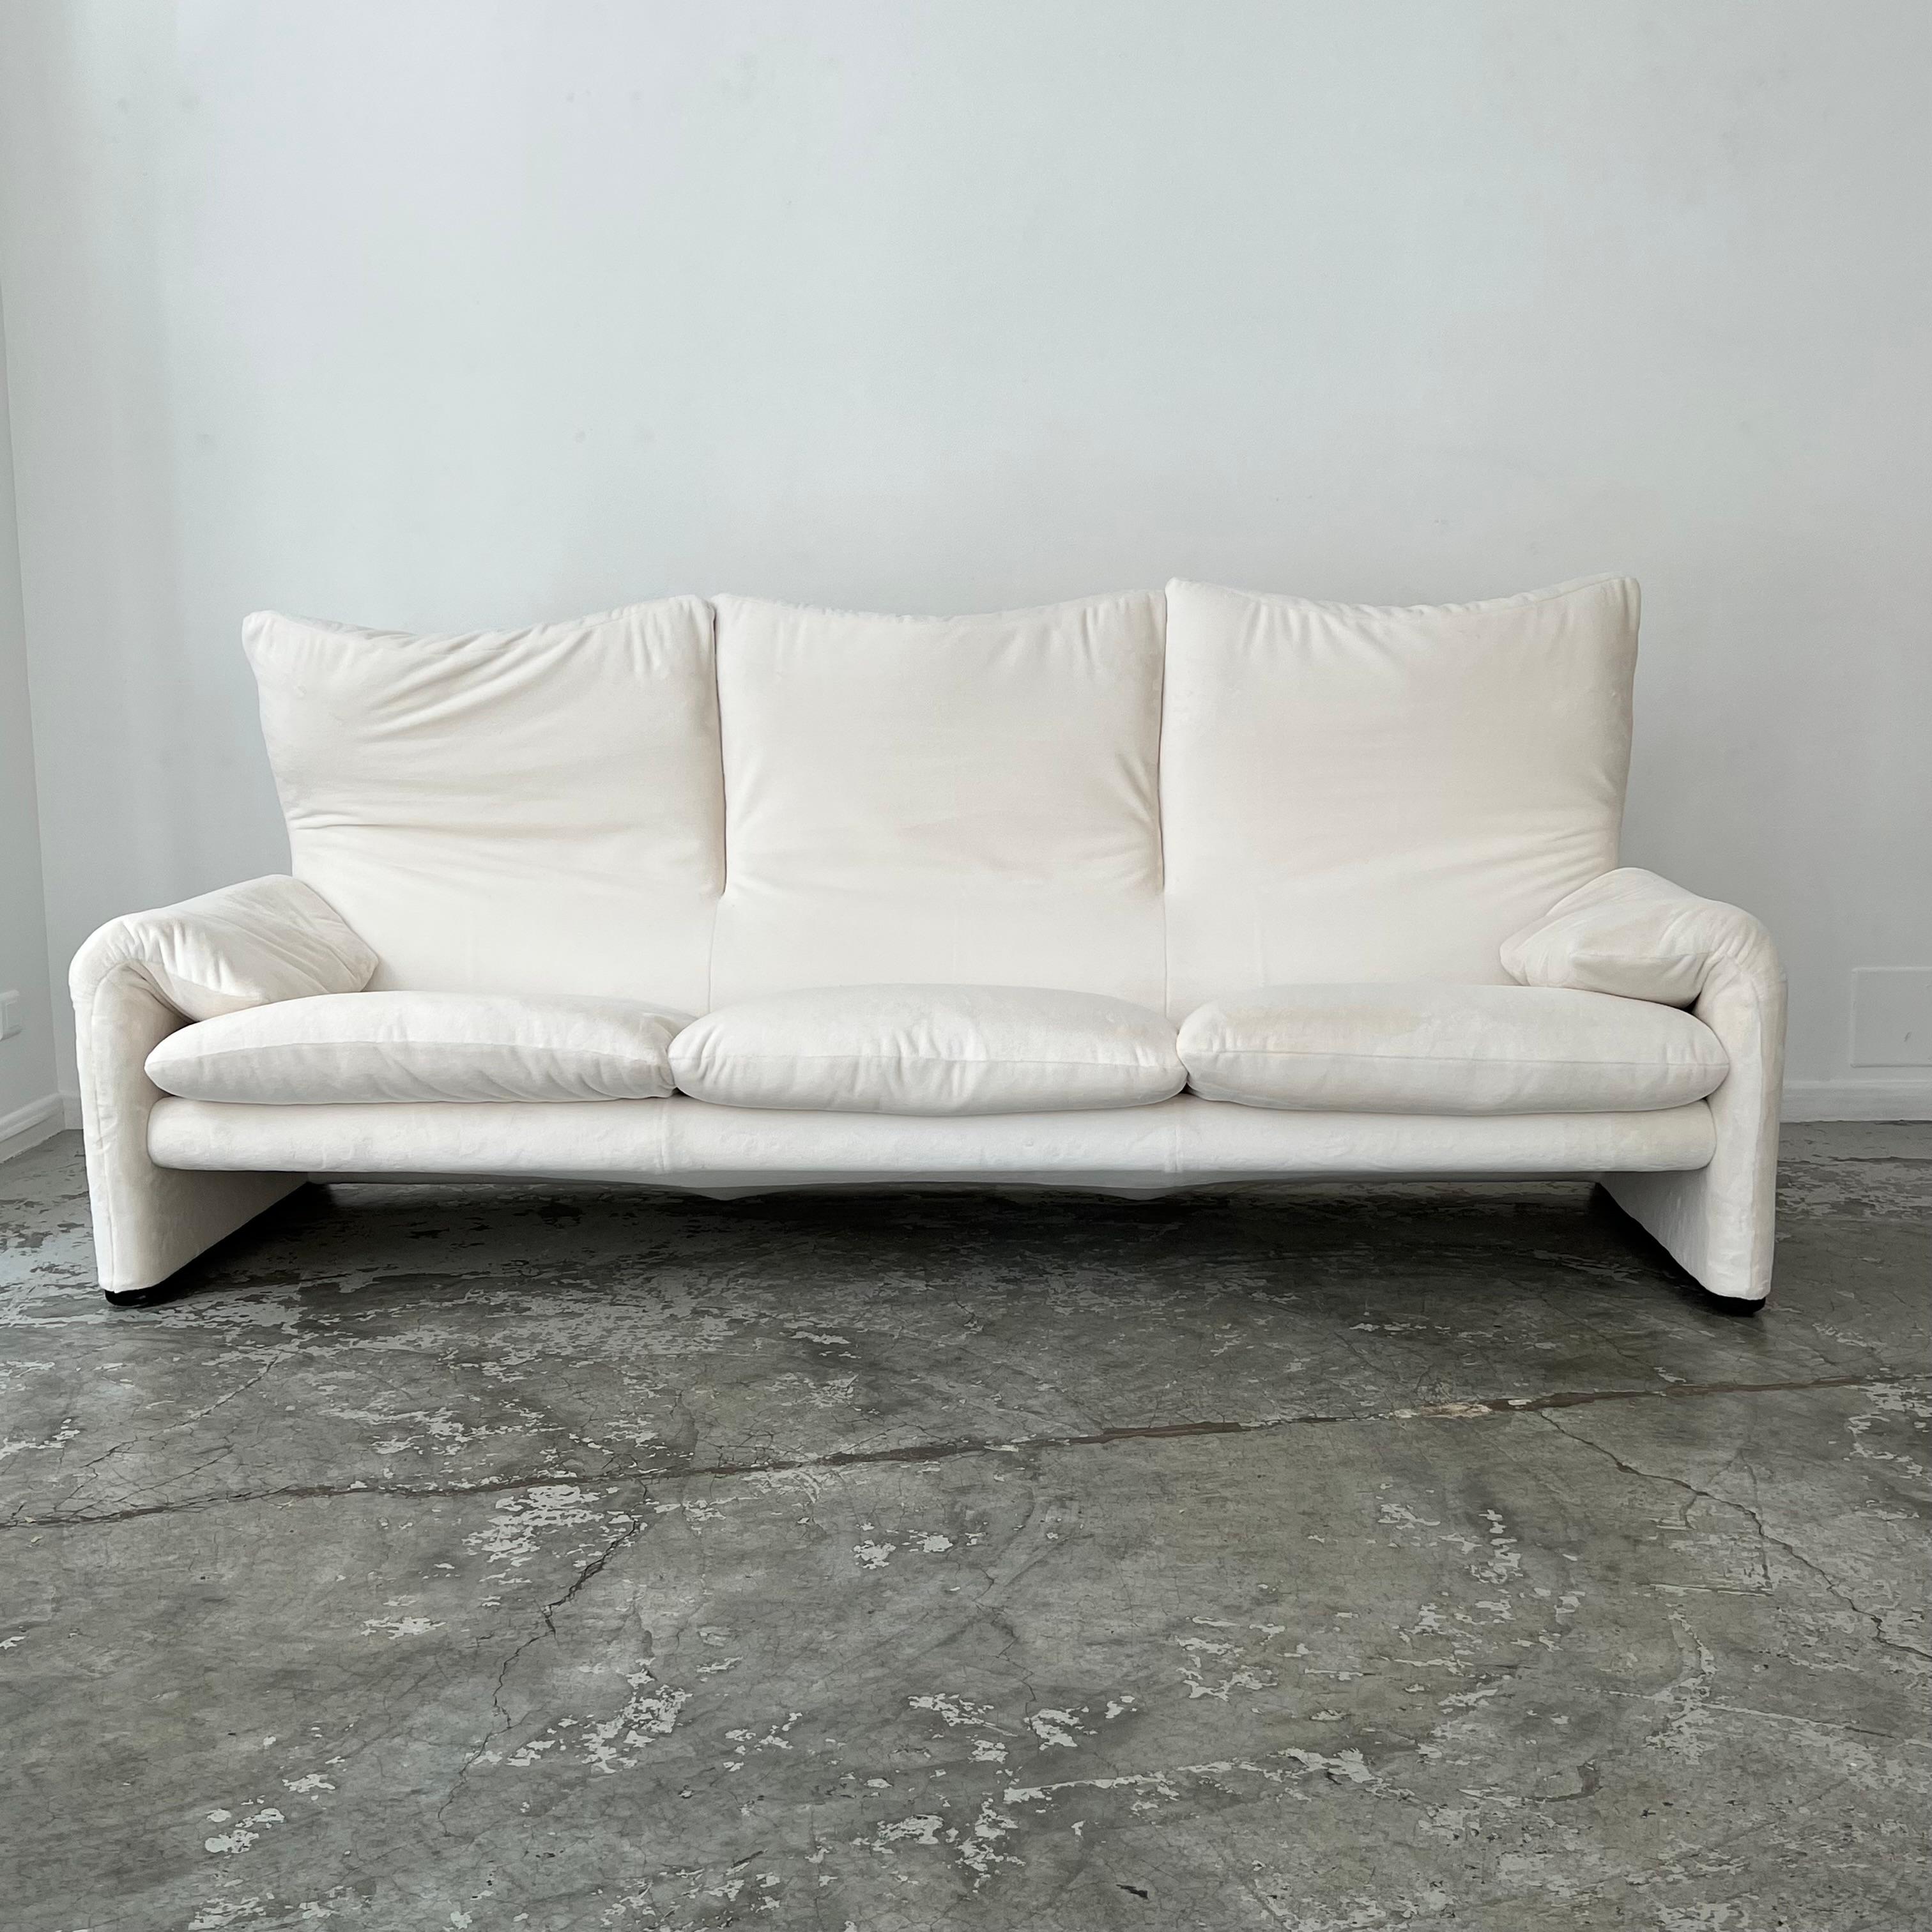 Mid-Century Modern 3-seater Maralunga sofa by Vico Magistretti for Cassina Italy 1973 For Sale